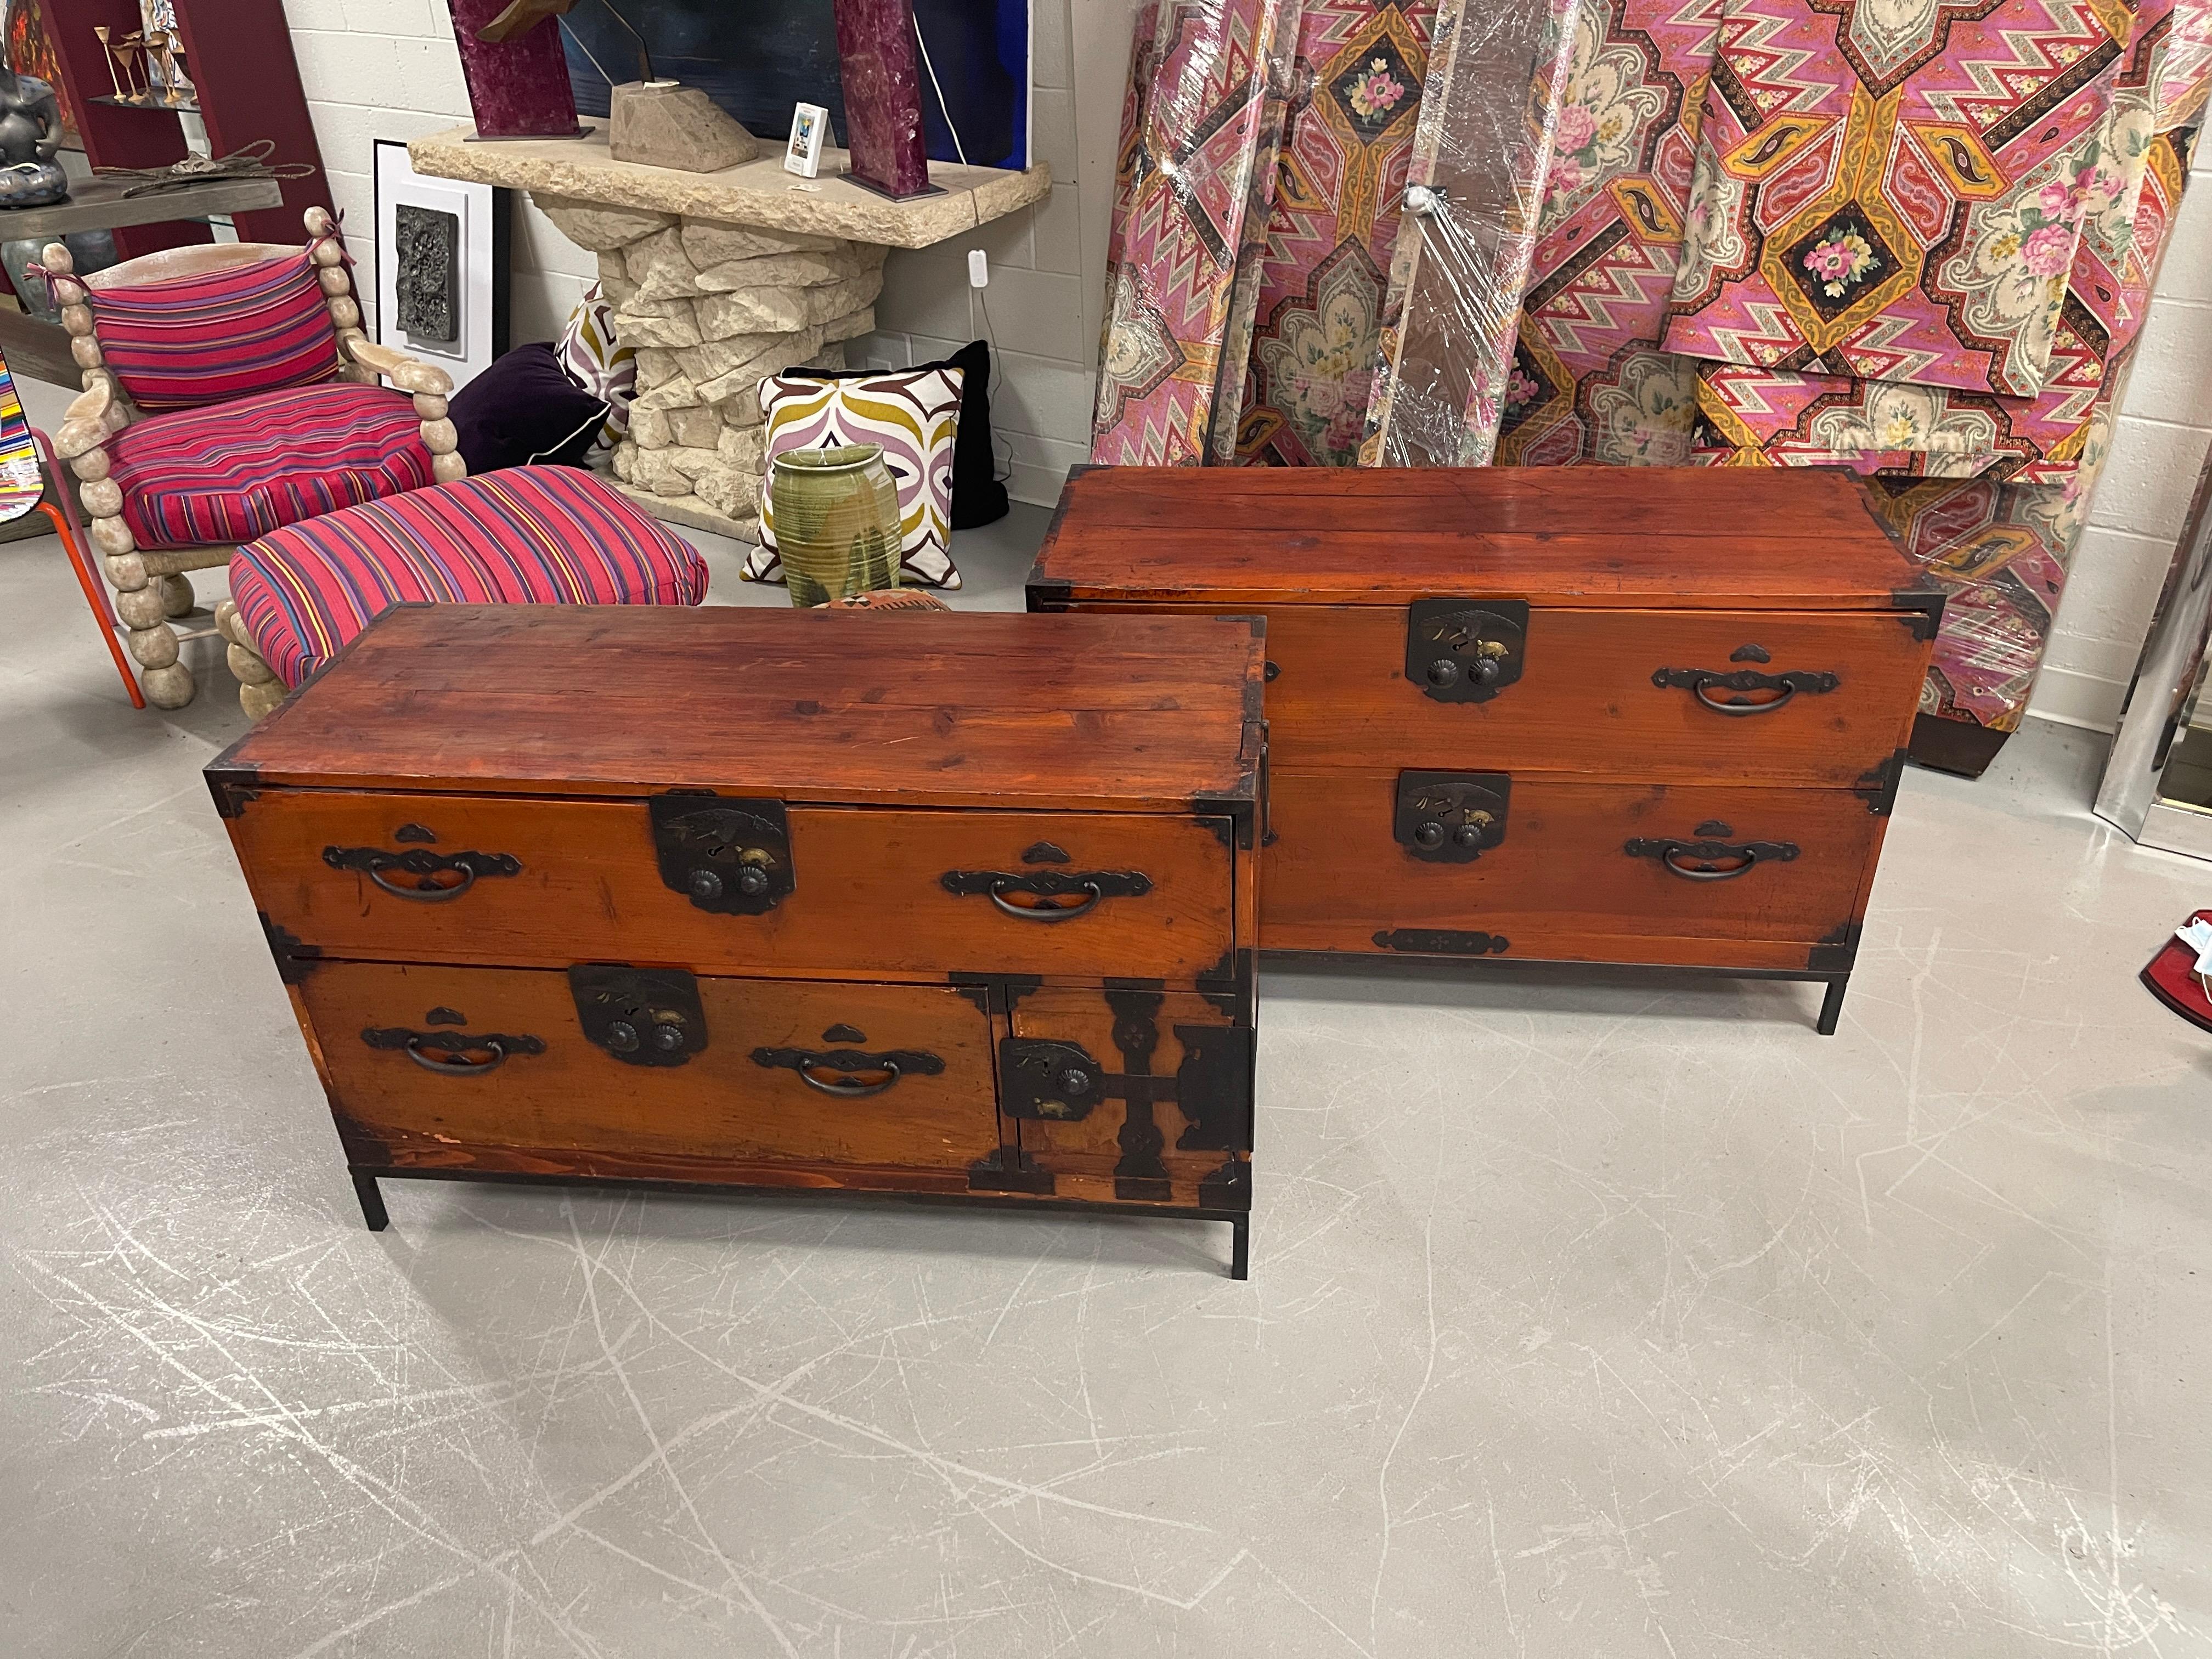 Beautiful pair of Japanese Tansu chests. These are out of a great Palm Springs estate. These are old Meiji period chests that have been refitted with new interiors and frames in the 1980's. The hardware is wonderful and period. In good overall